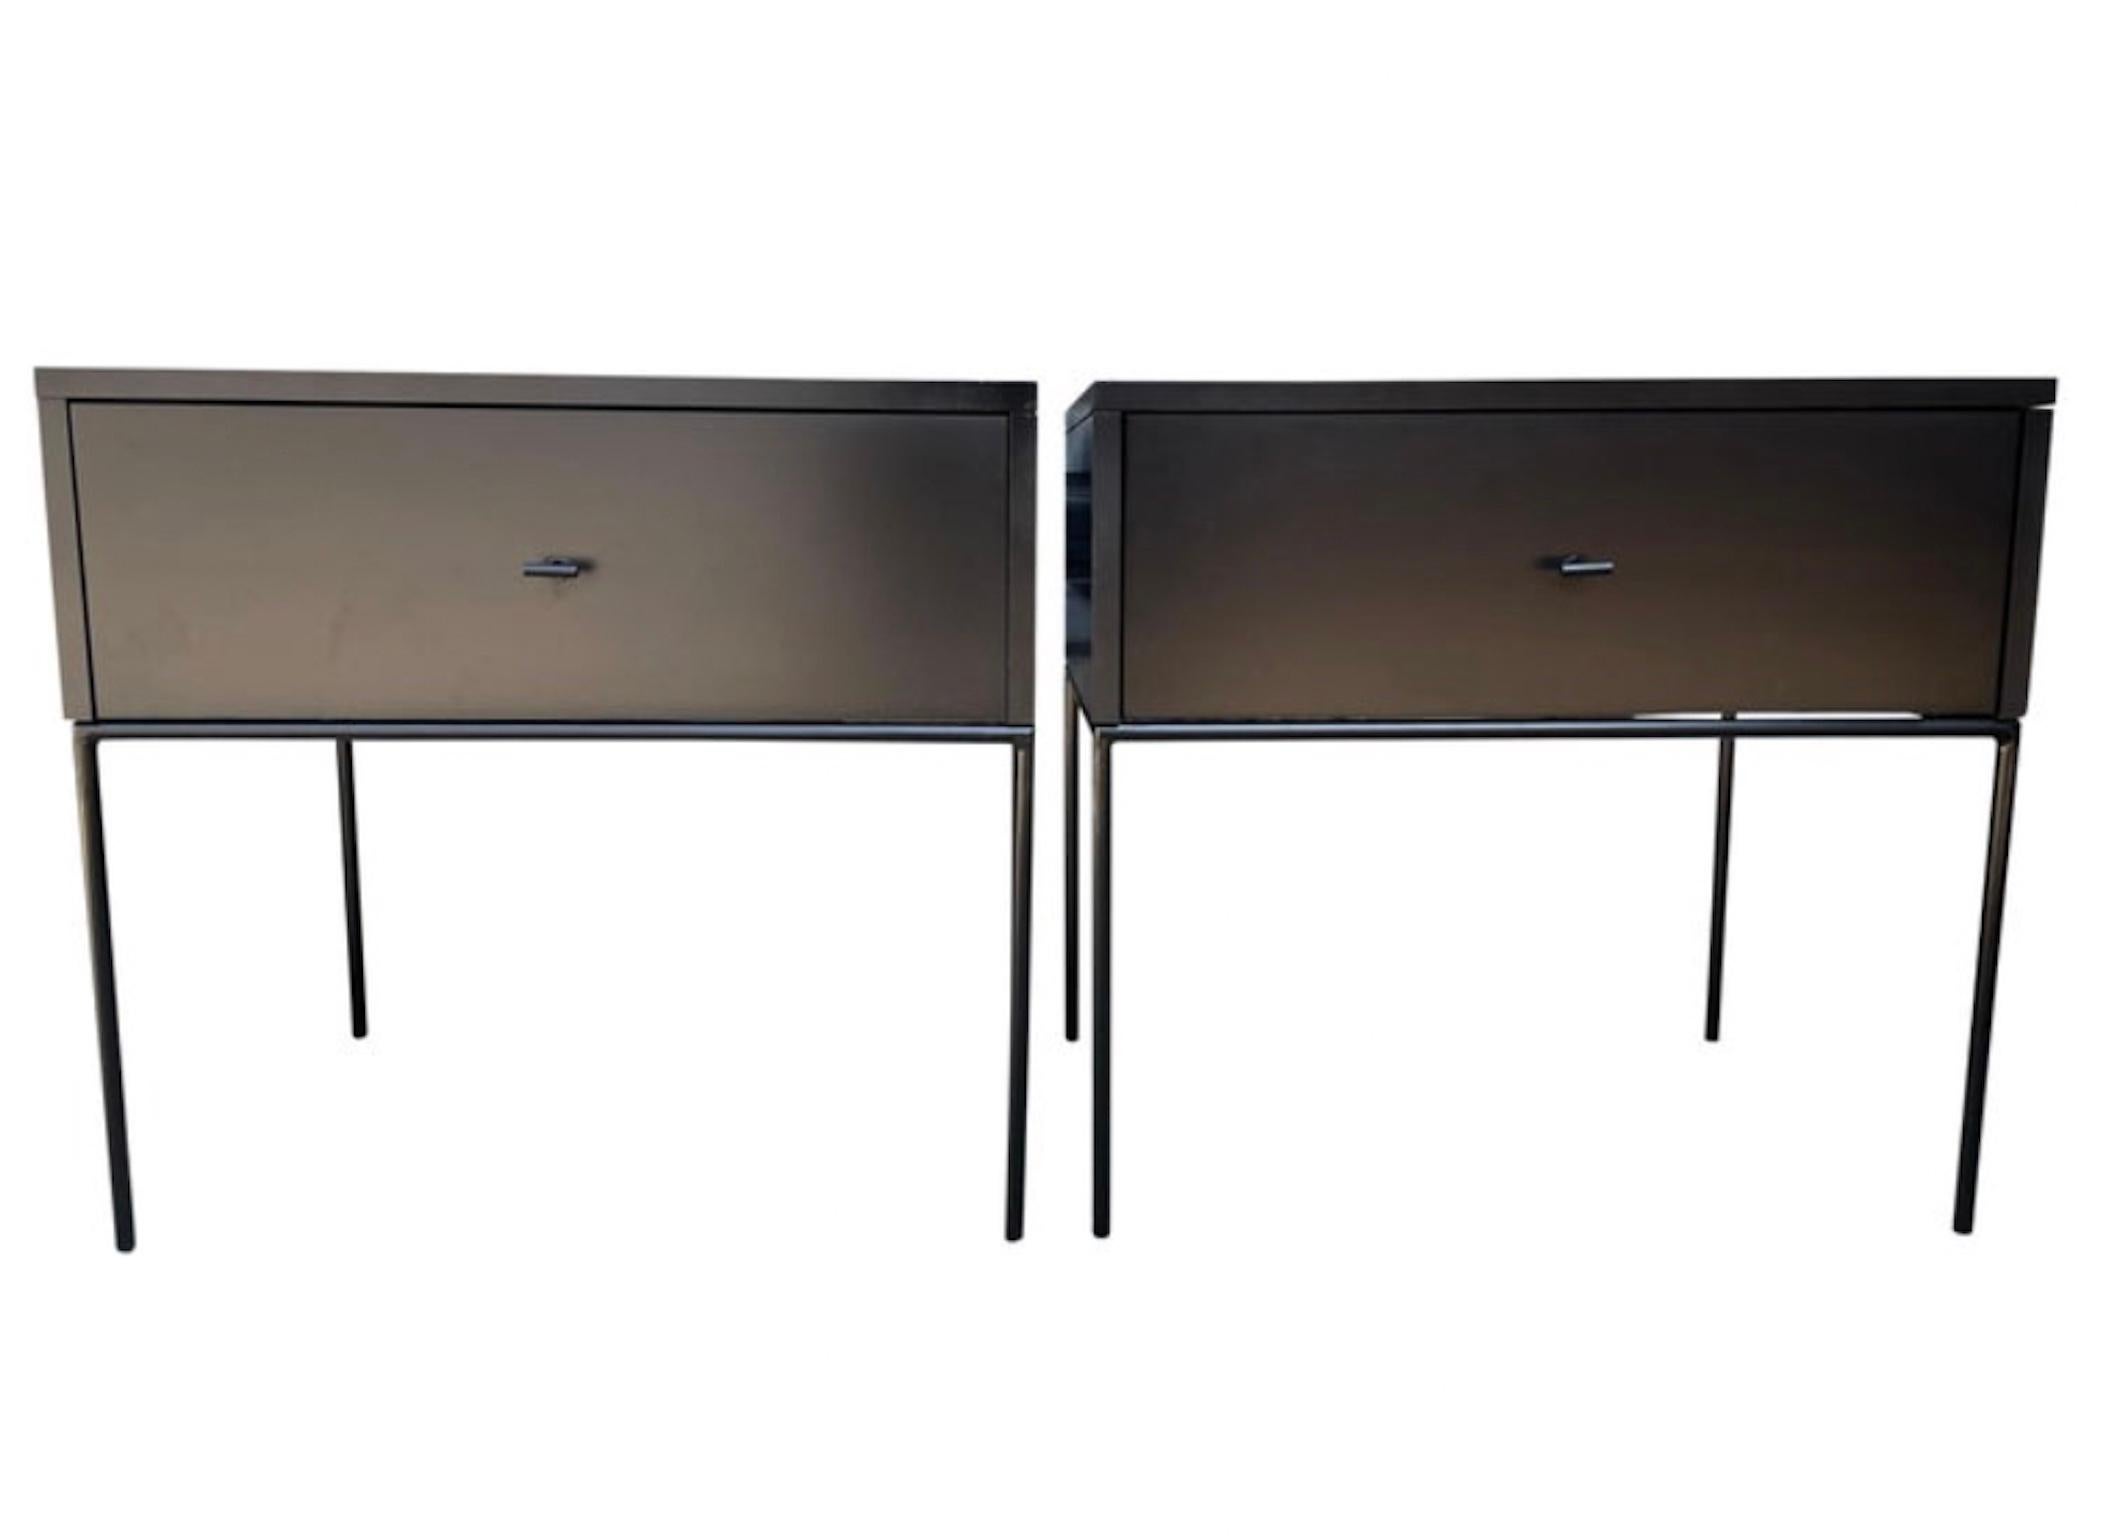 Beautiful pair of Paul McCobb planner group #1500 maple nightstands end tables single drawer. Black T pull knobs. Good vintage condition with Black lacquer finish on maple. Very modern designed pair of nightstands with iron base with 4 legs. All